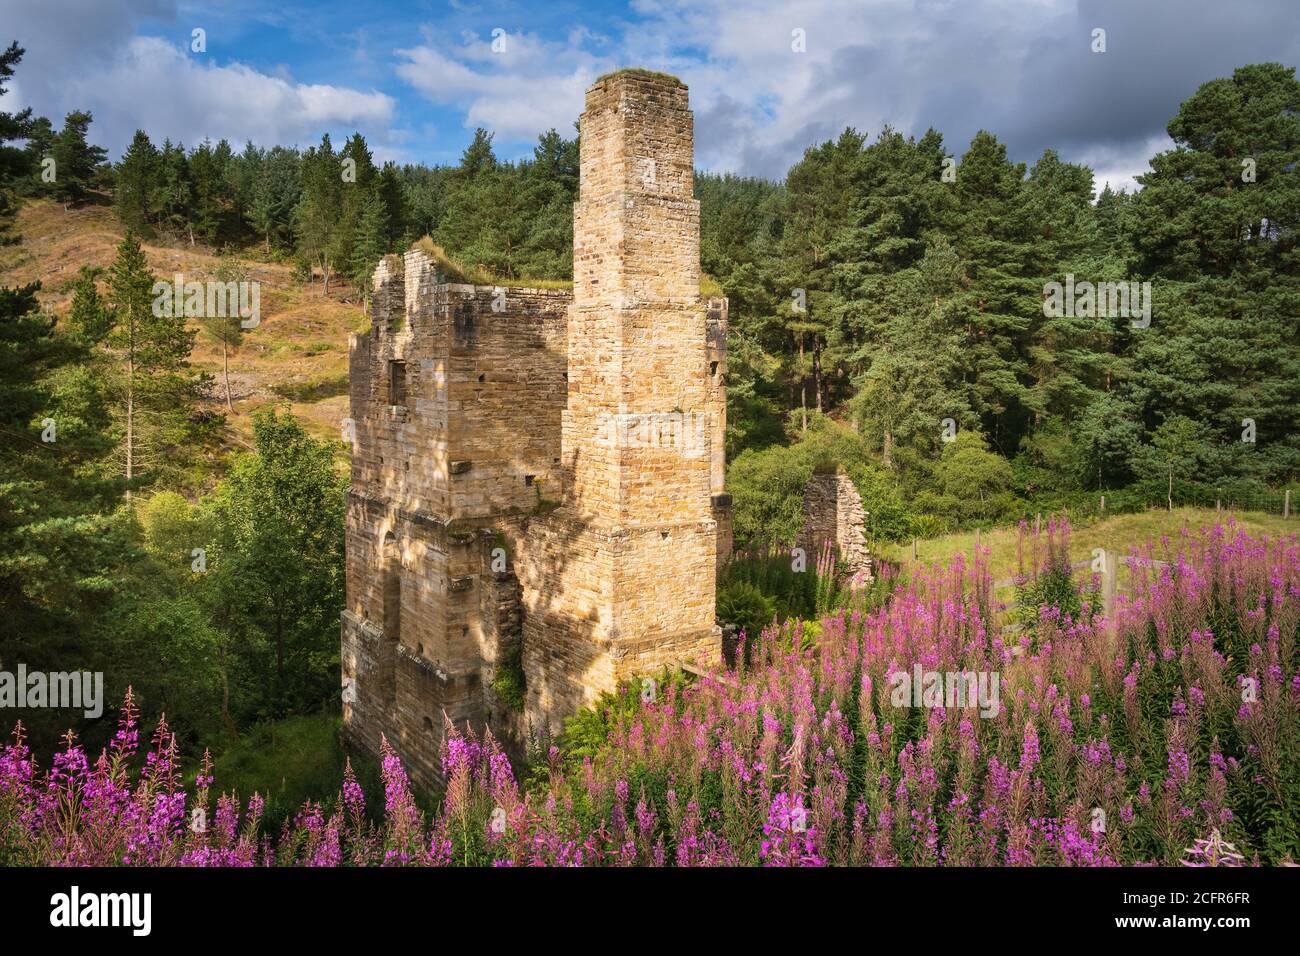 Shildon Engine House for a Cornish pumping engine now an industrial ruin in Blanchland Northumberland & relic of the 19th Century lead mining industry Stock Photo